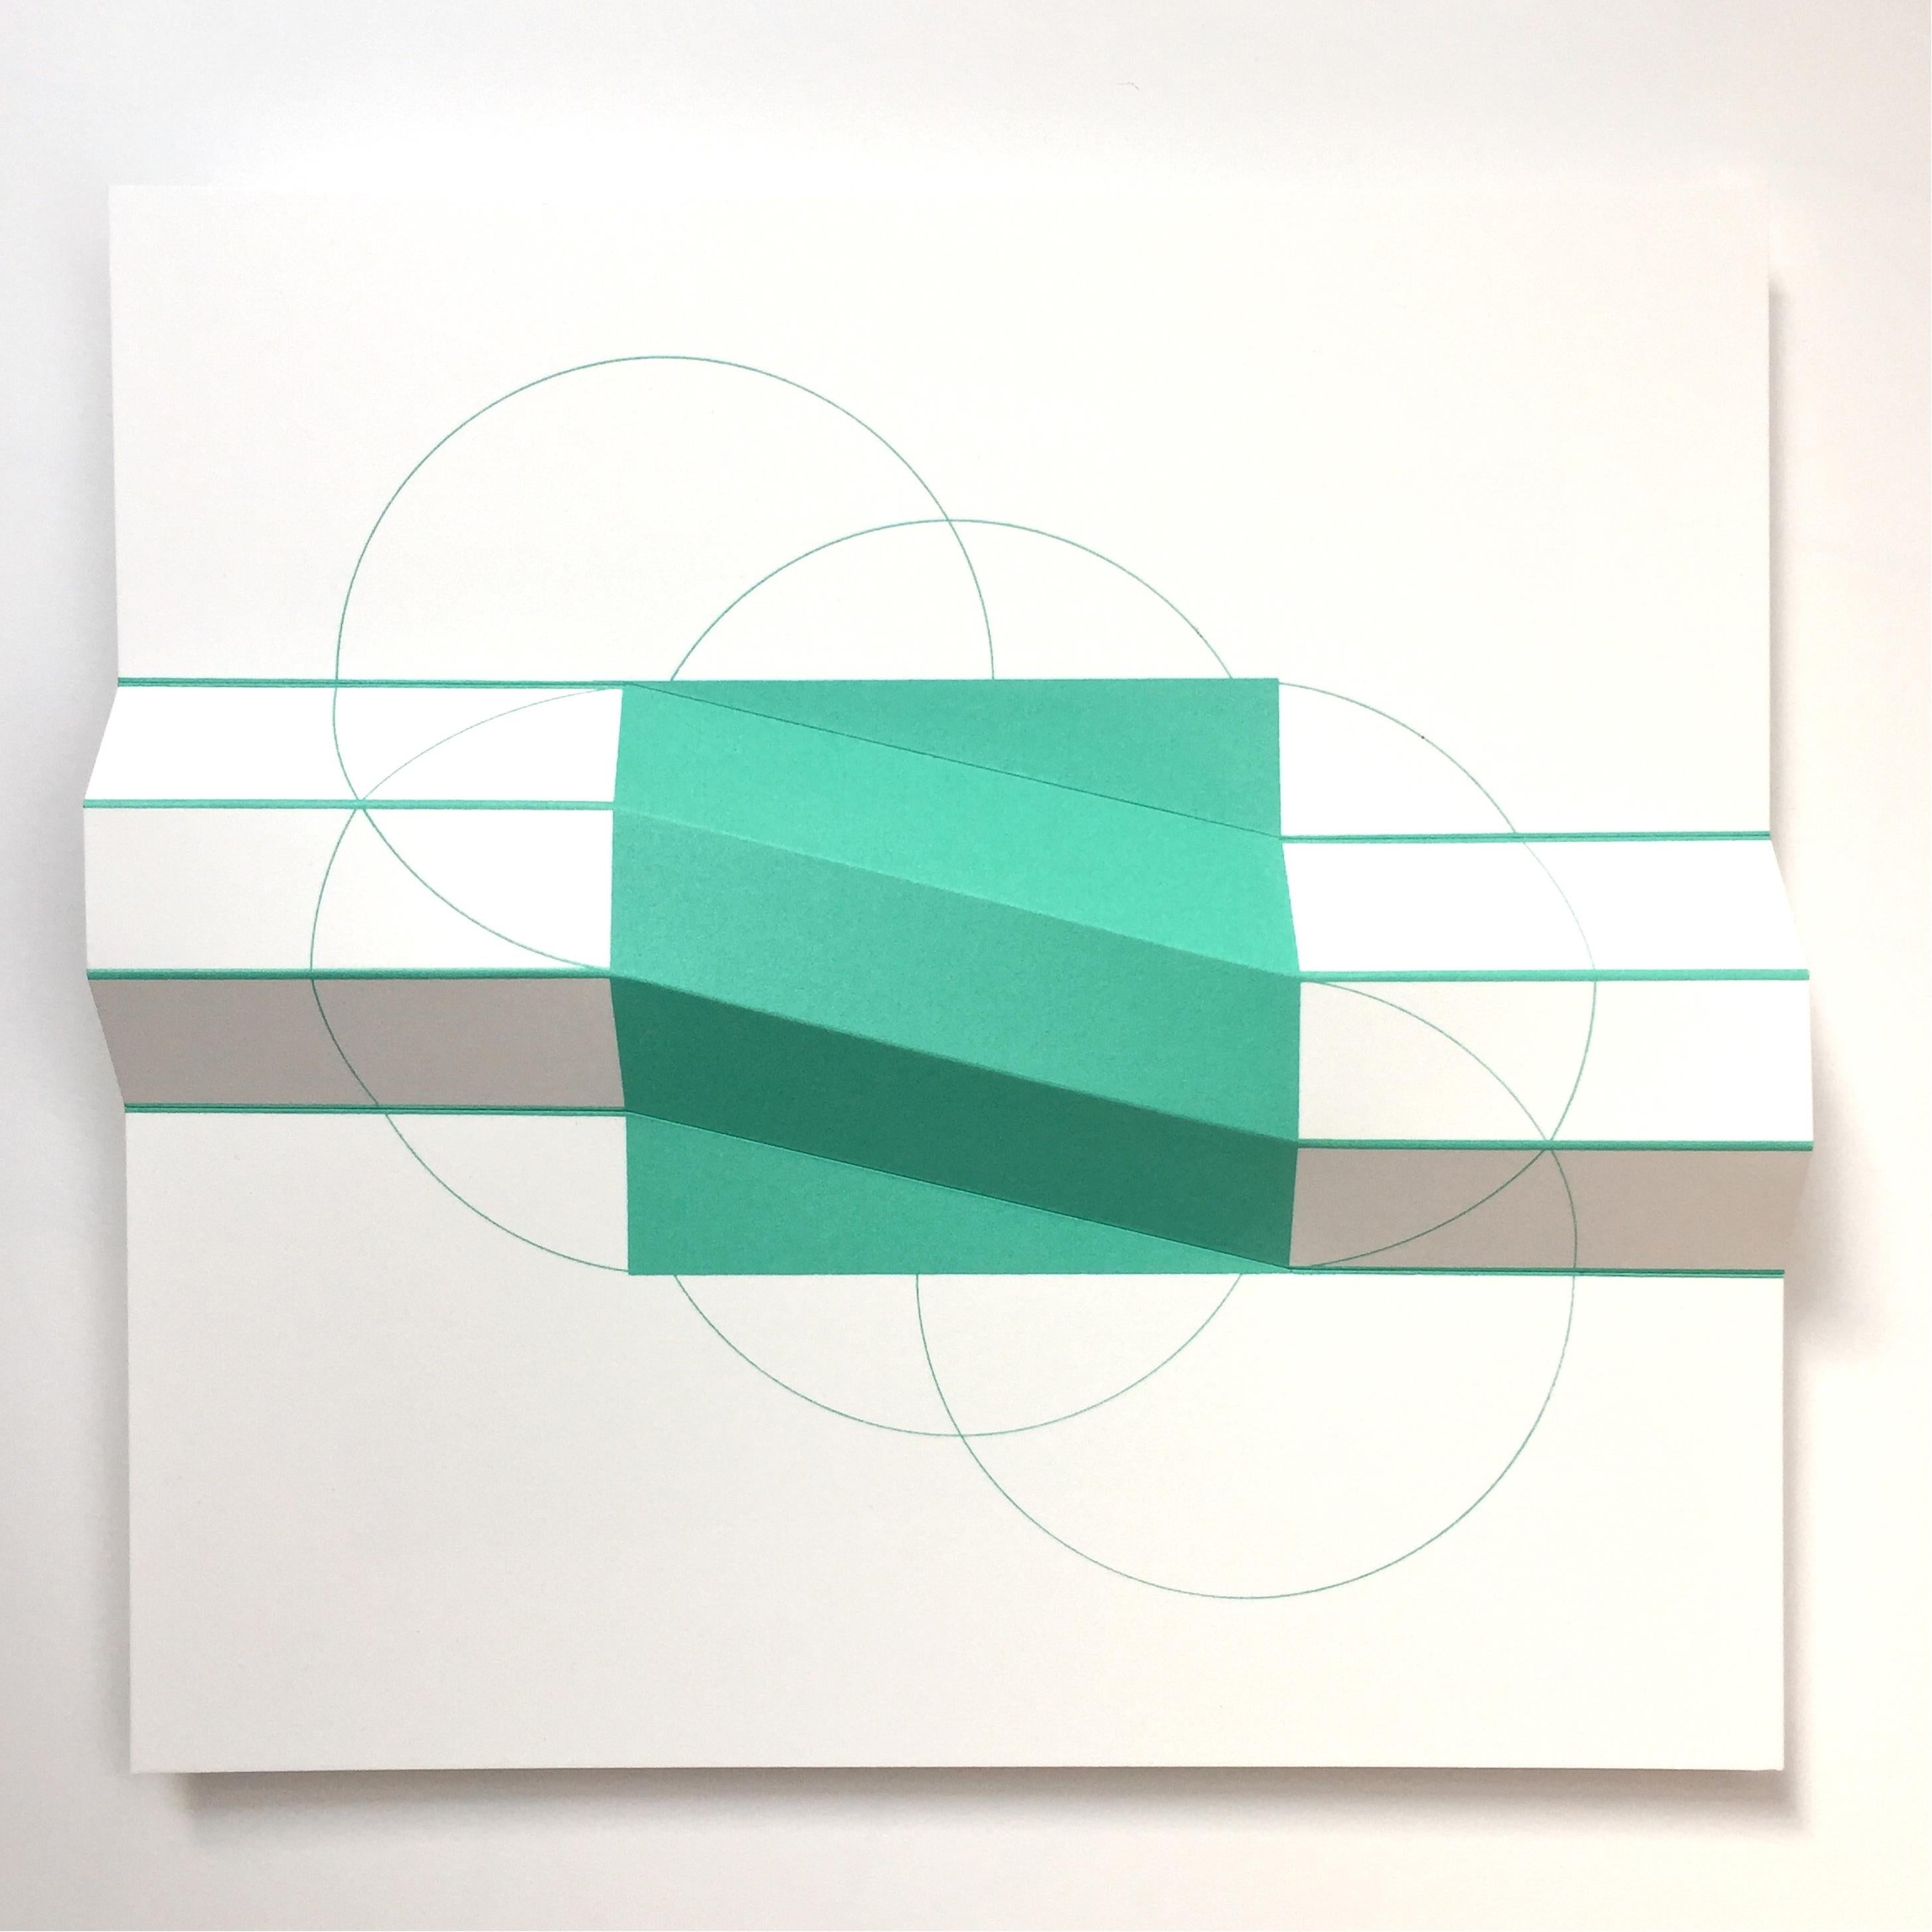 'Brigitte Parusel's screen prints, drawings and sculptures are part of an ongoing exploration of a geometric pattern of interconnected circles. Her works might appear carefully planned, but they emerge from repeatedly testing and experimenting with